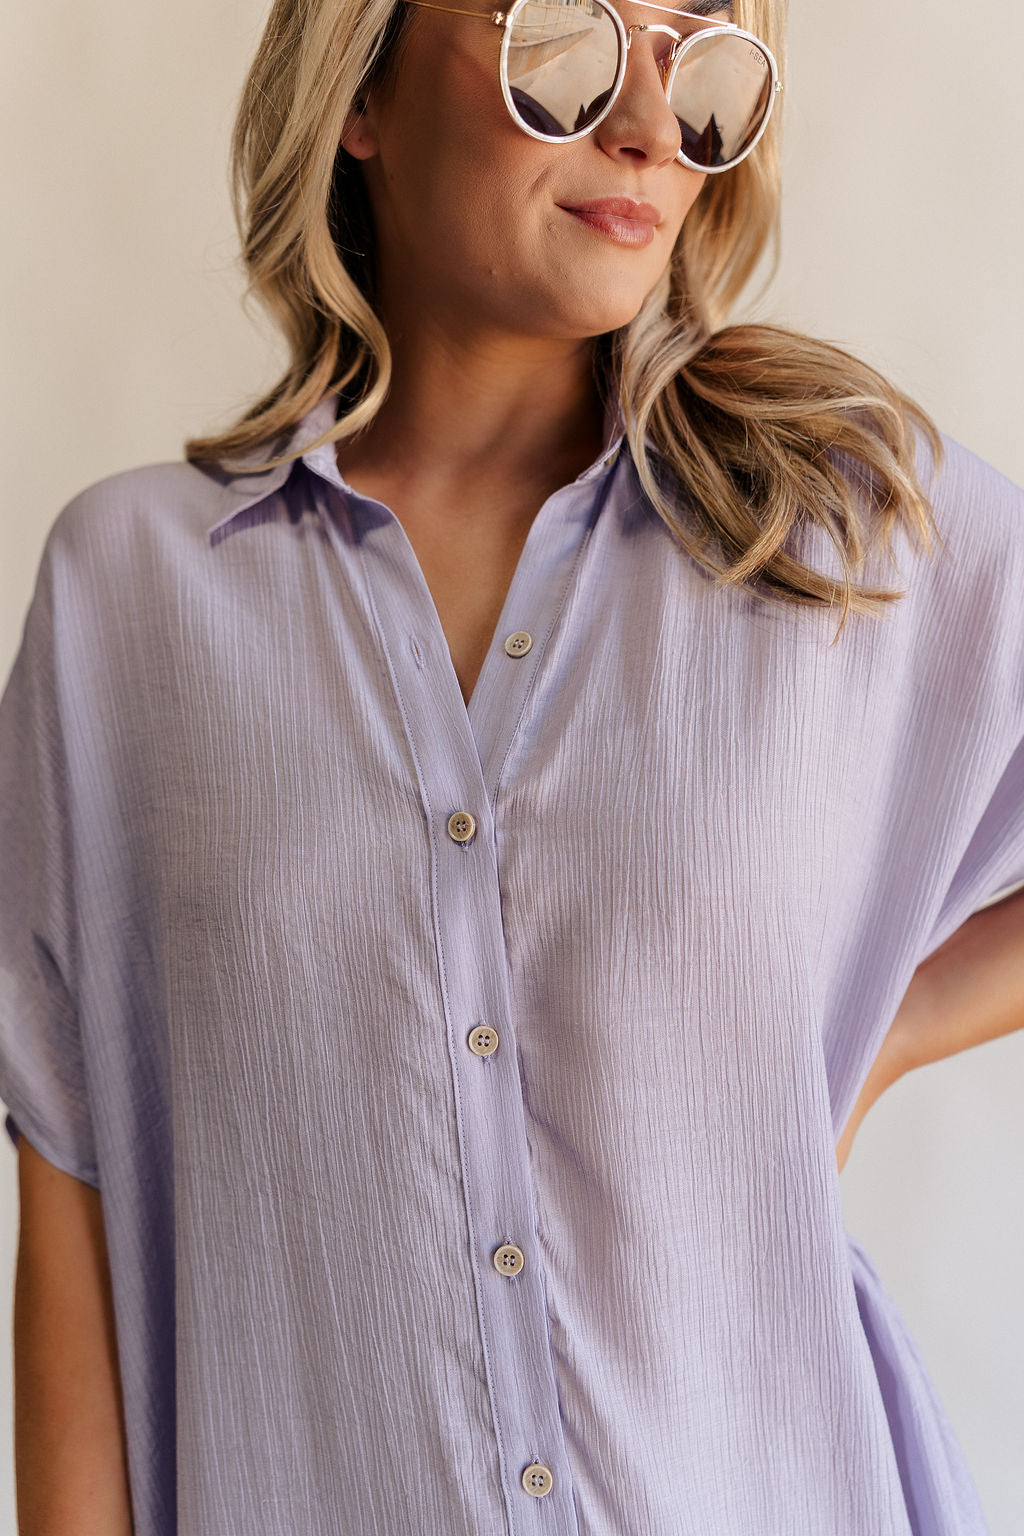 Close up front view of female model wearing the Luna Lavender Button-Up Short Sleeve Mini Dress which features Lavender Lightweight Fabric, Button-Up Front Closure, Collared Neckline and Short Sleeves